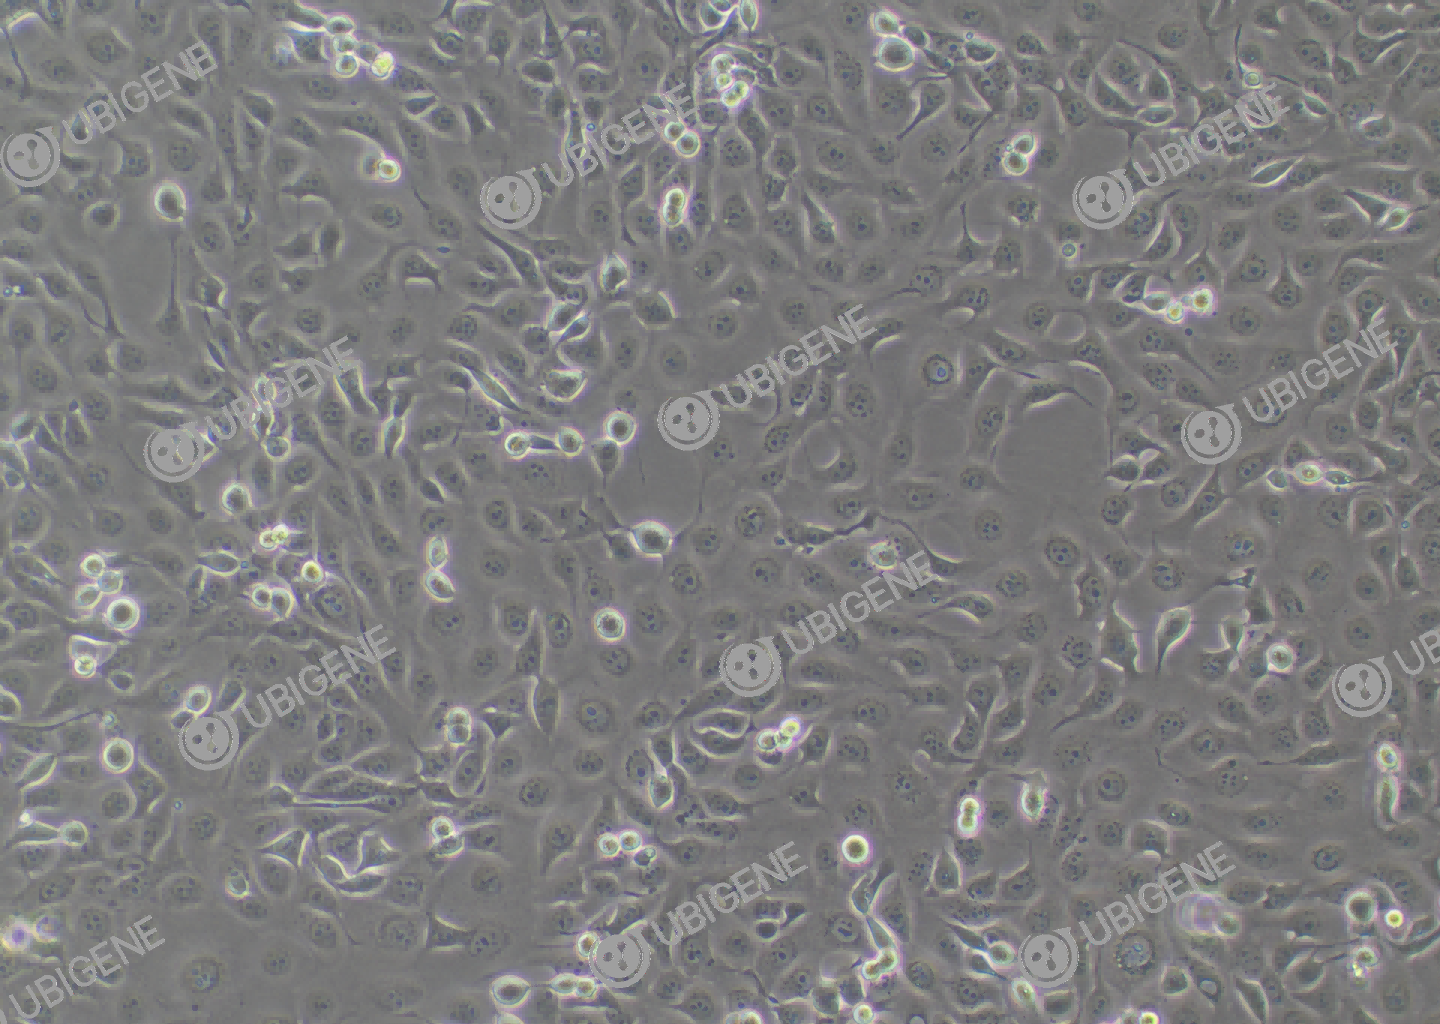 HCE-T cell line Cultured cell morphology